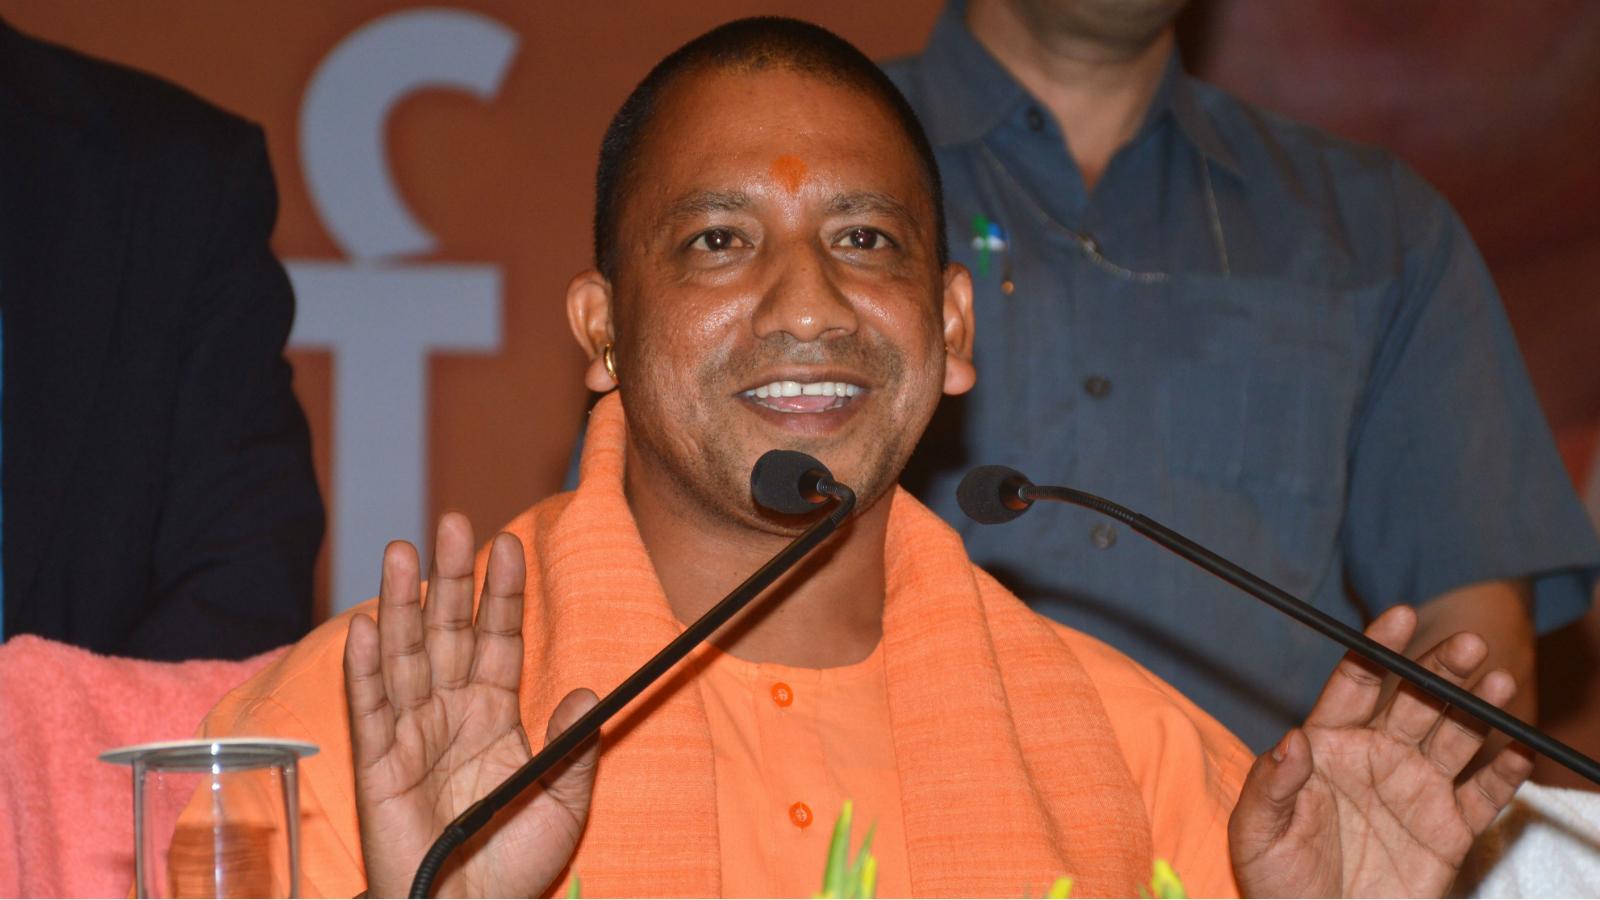 Uttar Pradesh chief minister Yogi Adityanath: The BJP monk who owns a revolver, a rifle, and Rs72 lakh in assets